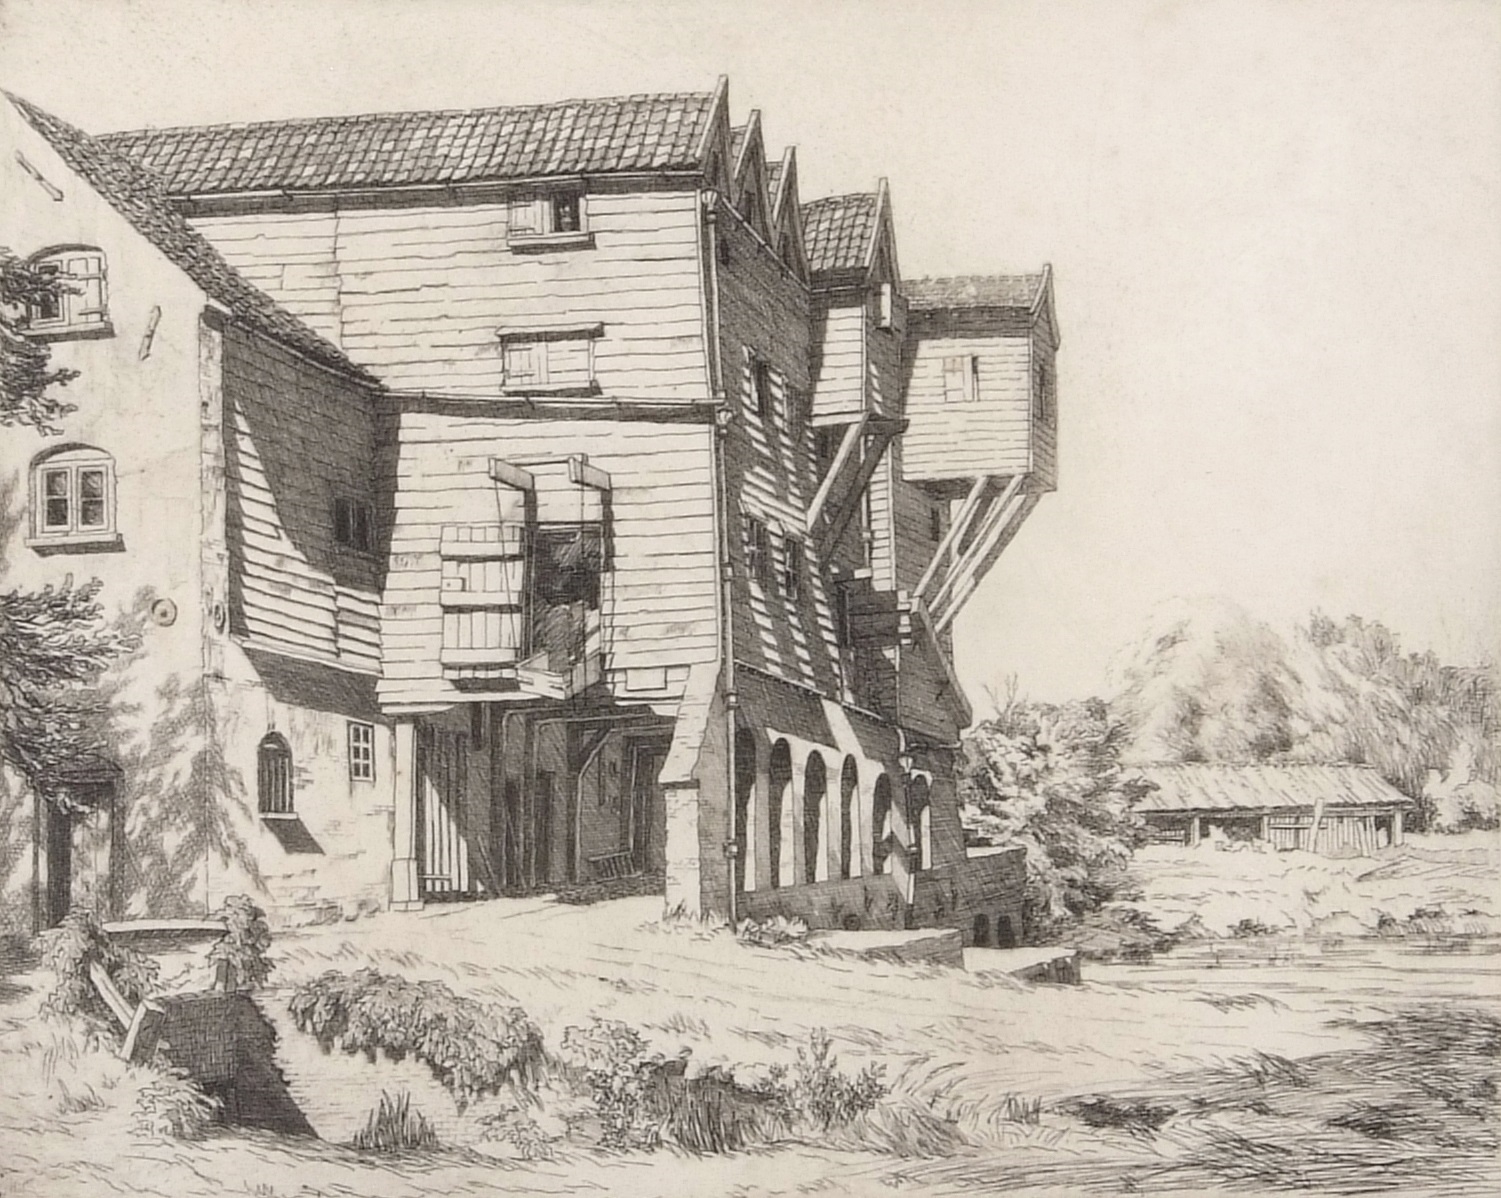 Artwork by Henry James Starling, "Horstead Mill-Norfolk", Made of etching